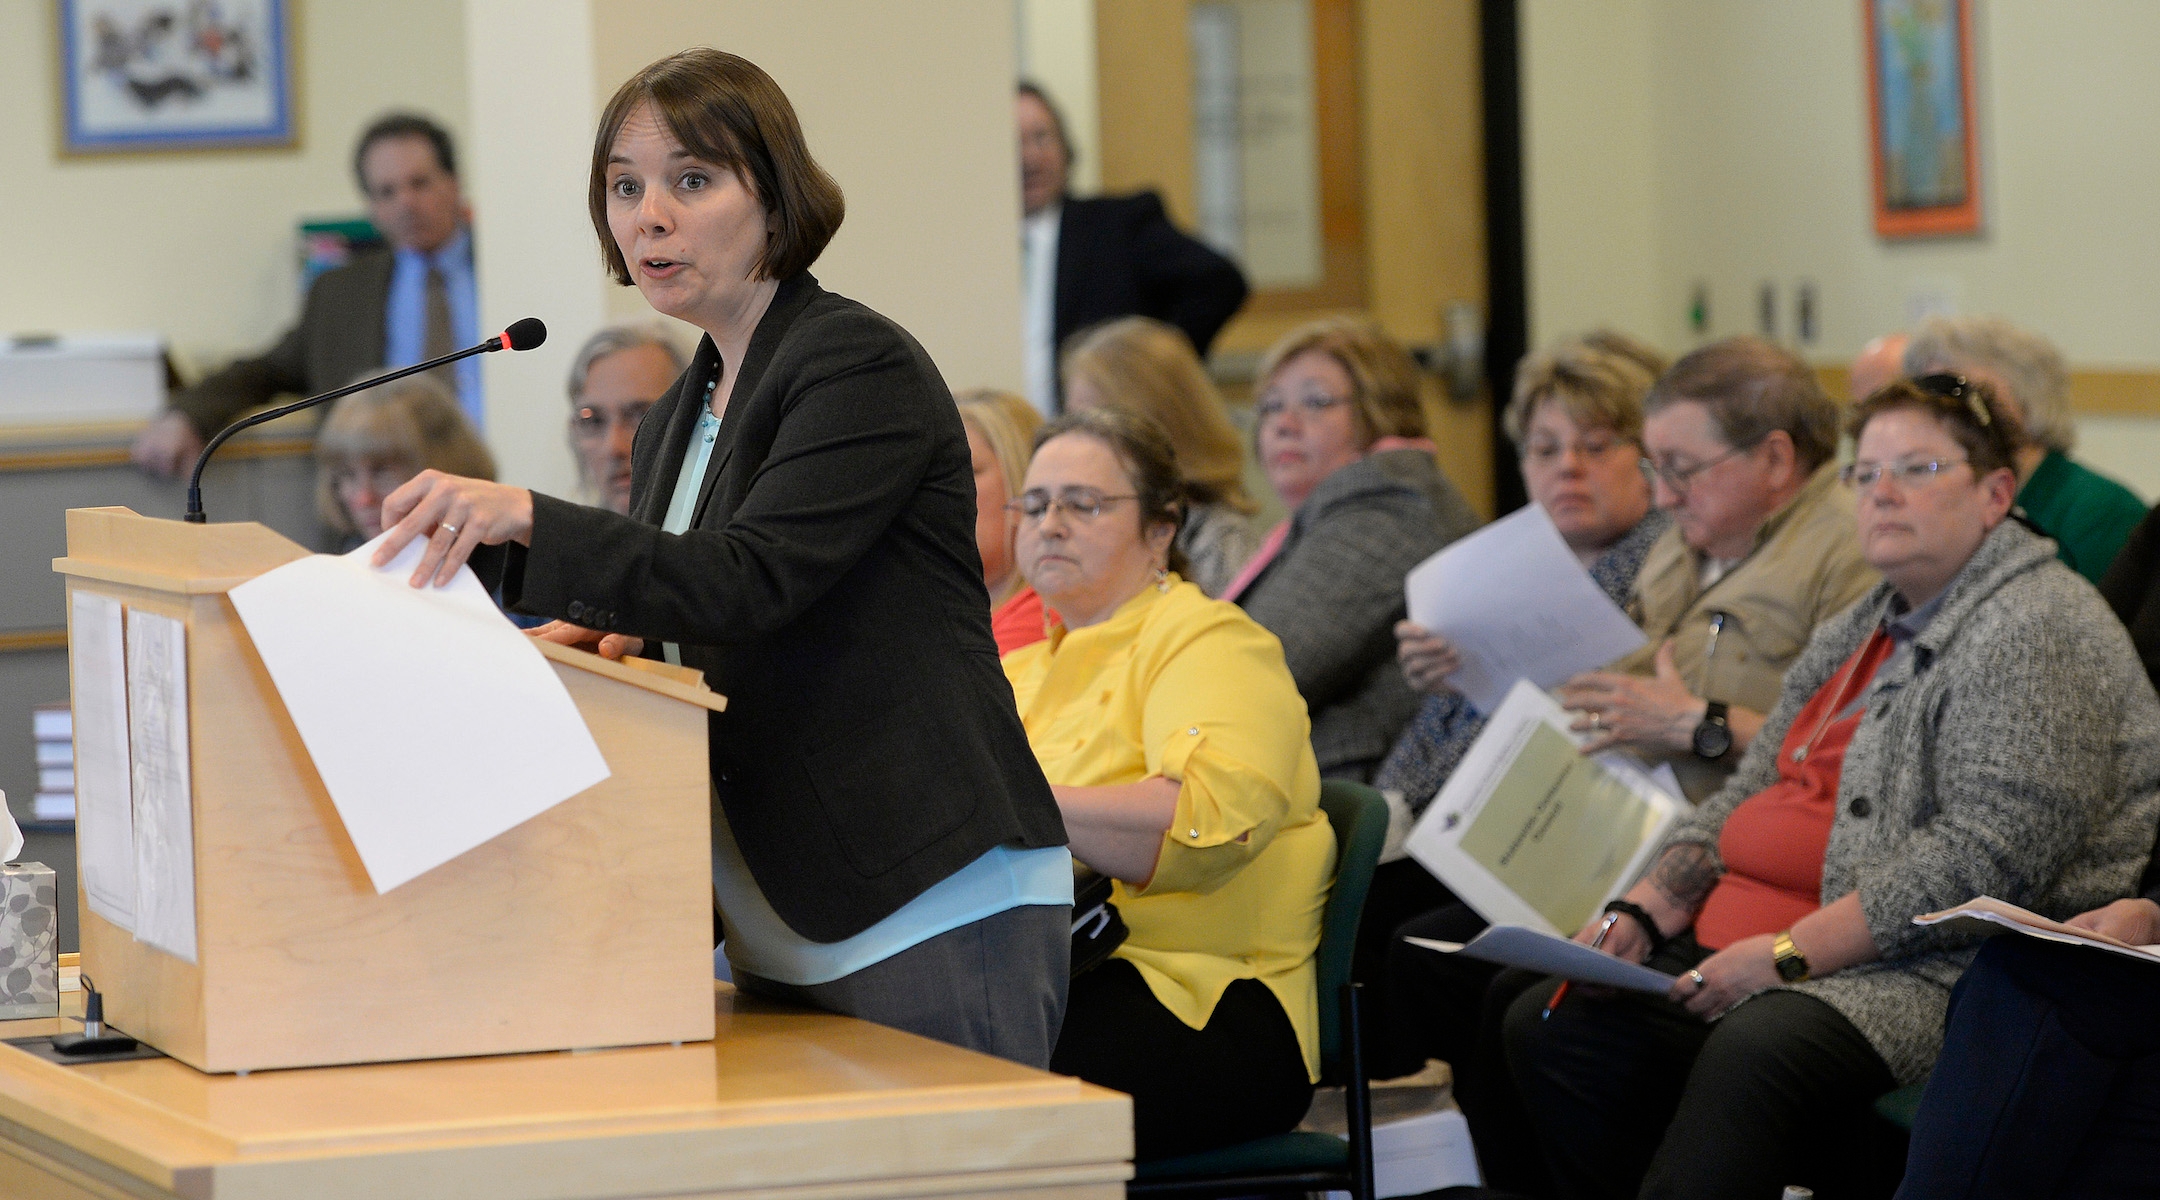 A politician speaks at a podium at a state house hearing in Maine